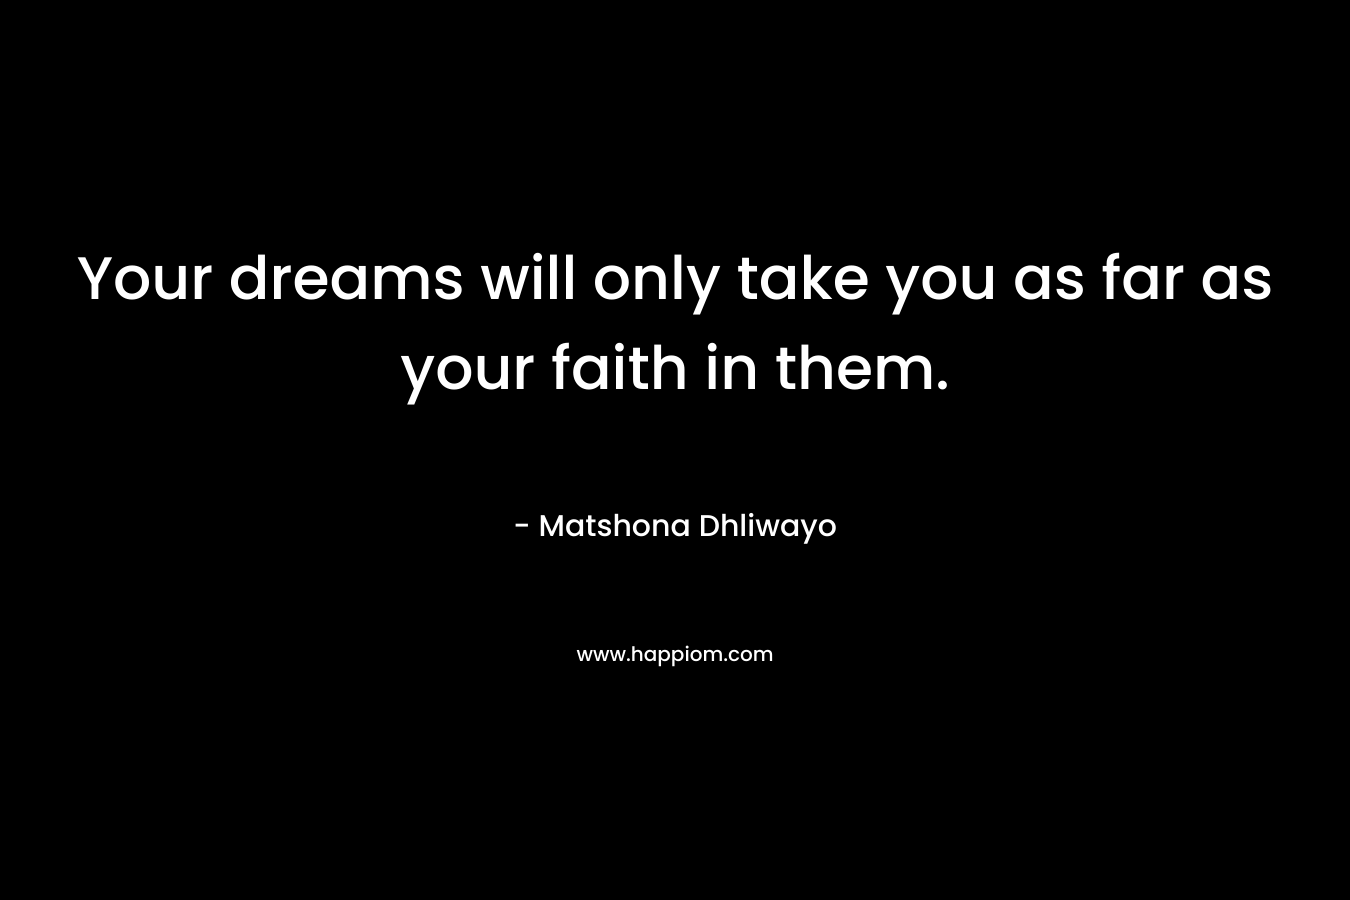 Your dreams will only take you as far as your faith in them.